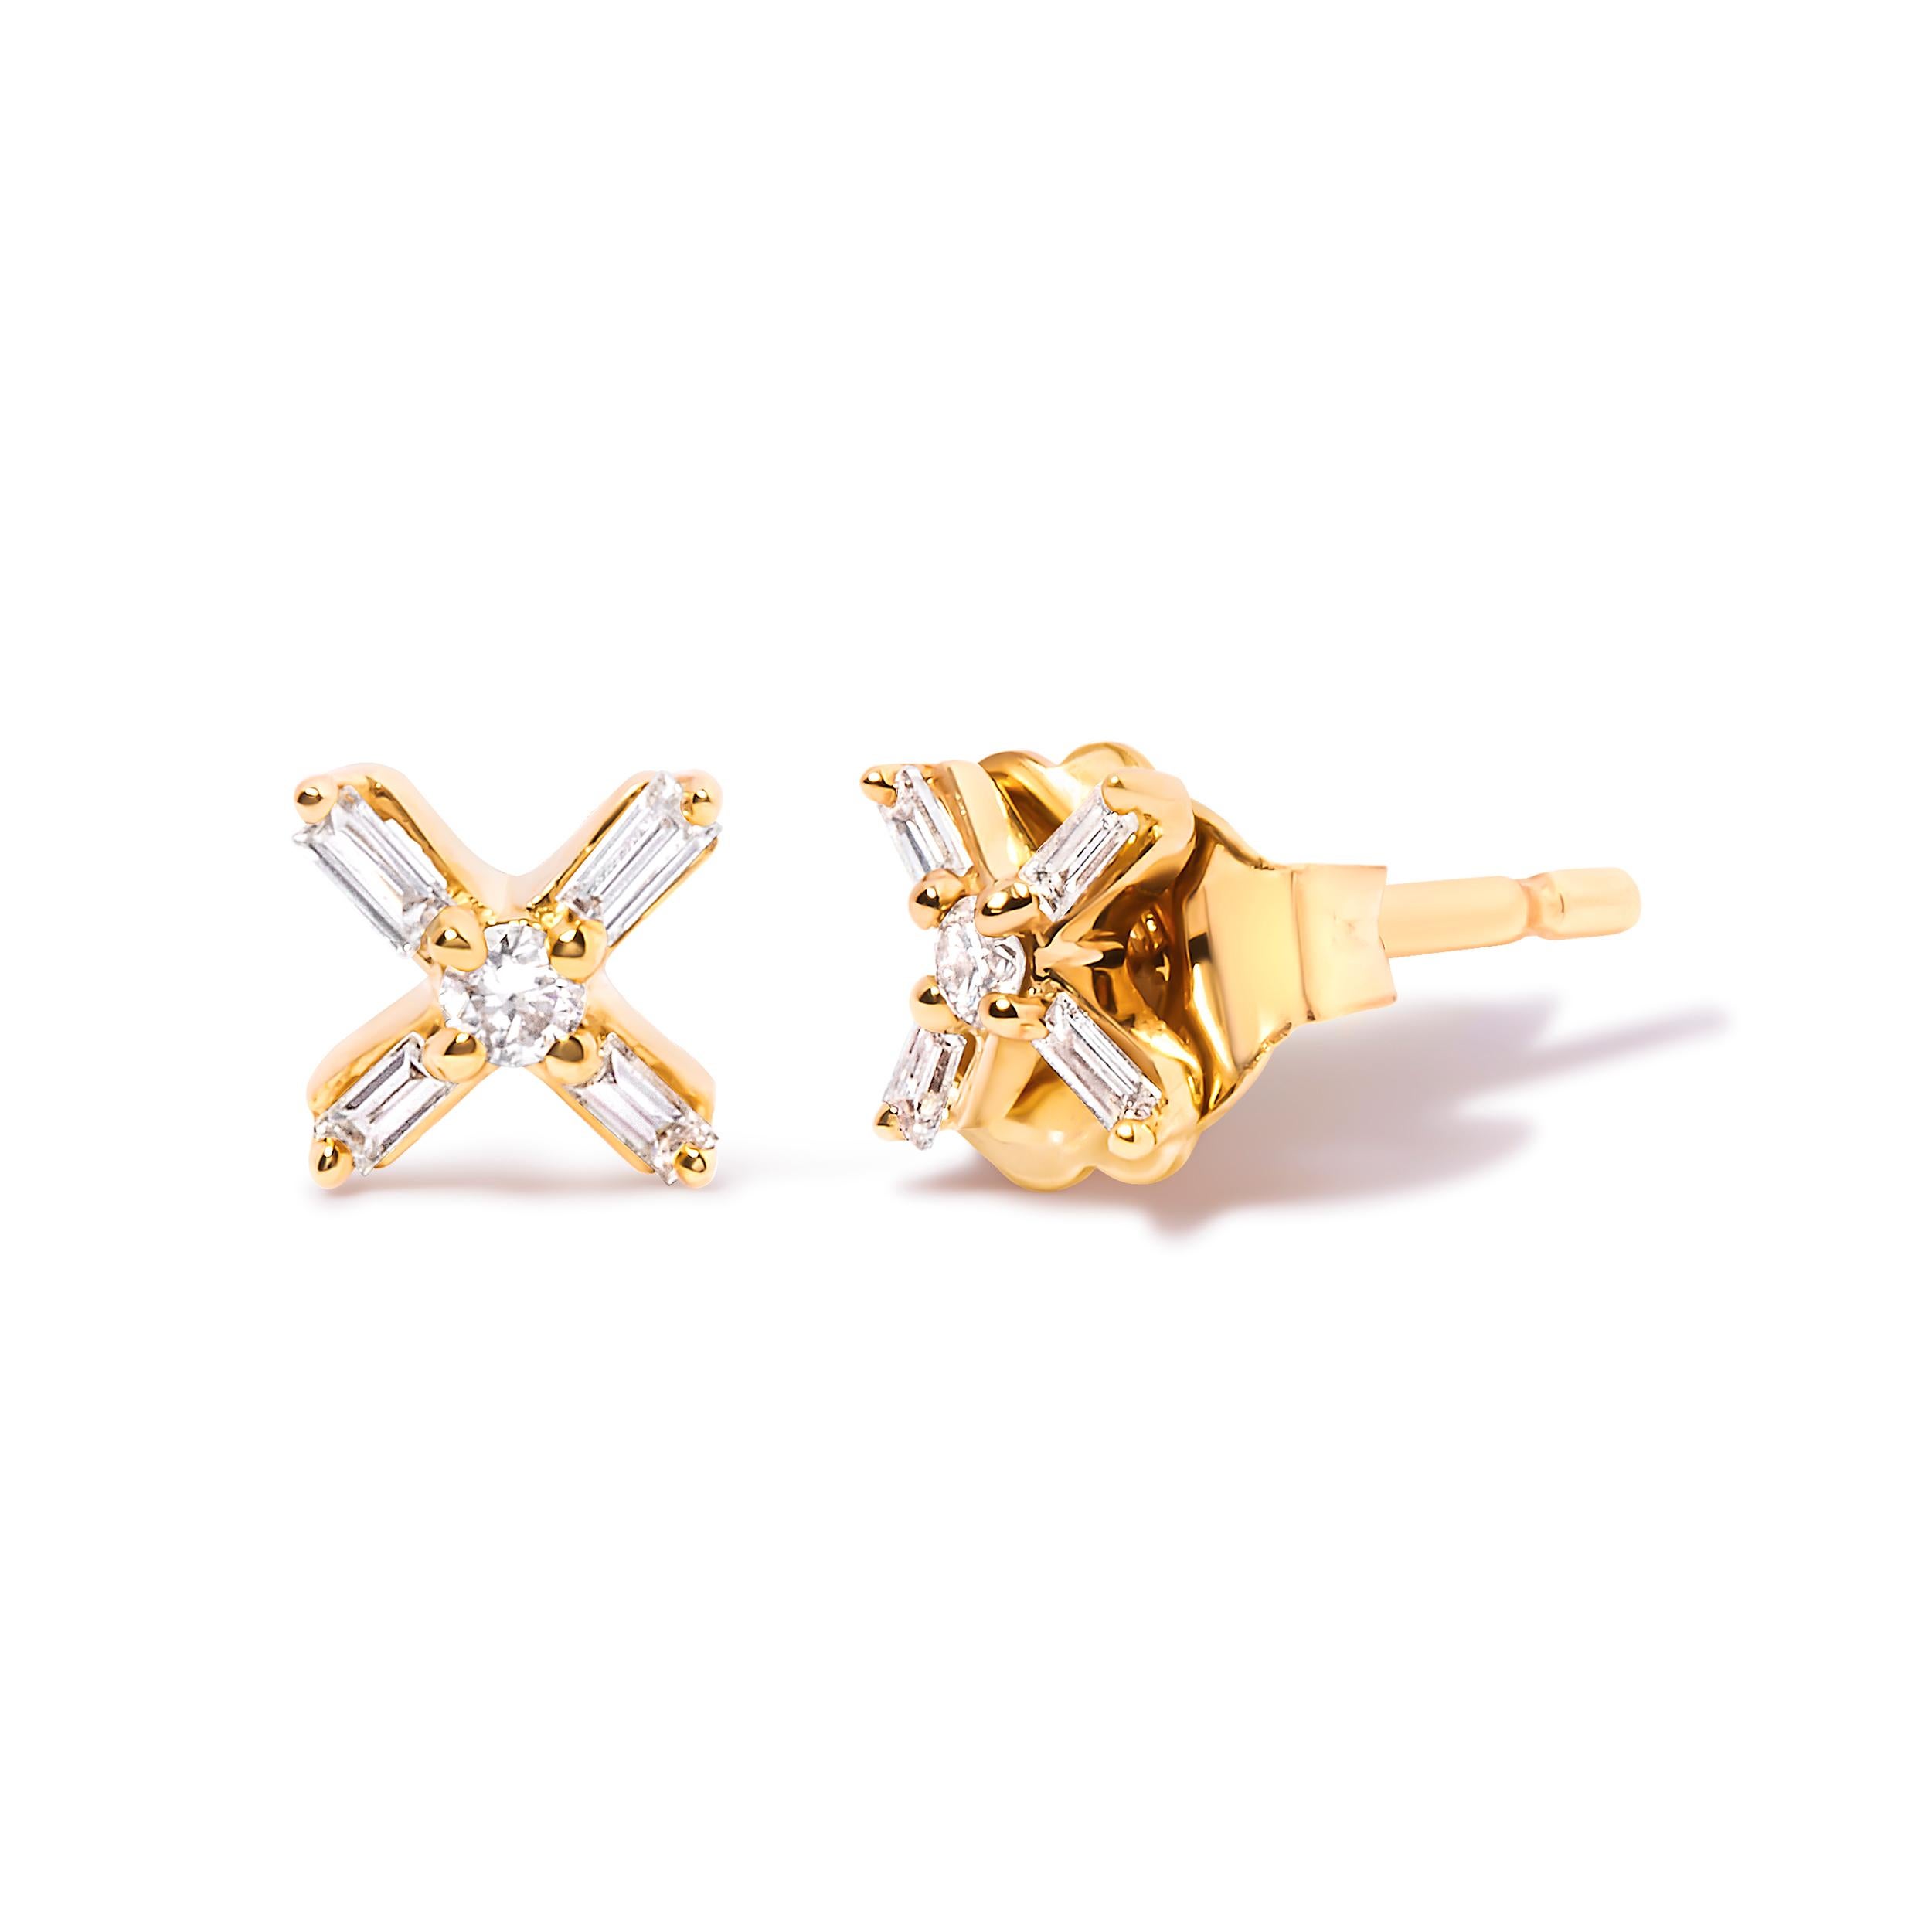 Introducing a captivating masterpiece that effortlessly combines elegance and style. Crafted in 10K yellow gold, these exquisite stud earrings are adorned with a mesmerizing criss-cross design, showcasing the brilliance of 10 natural diamonds. With